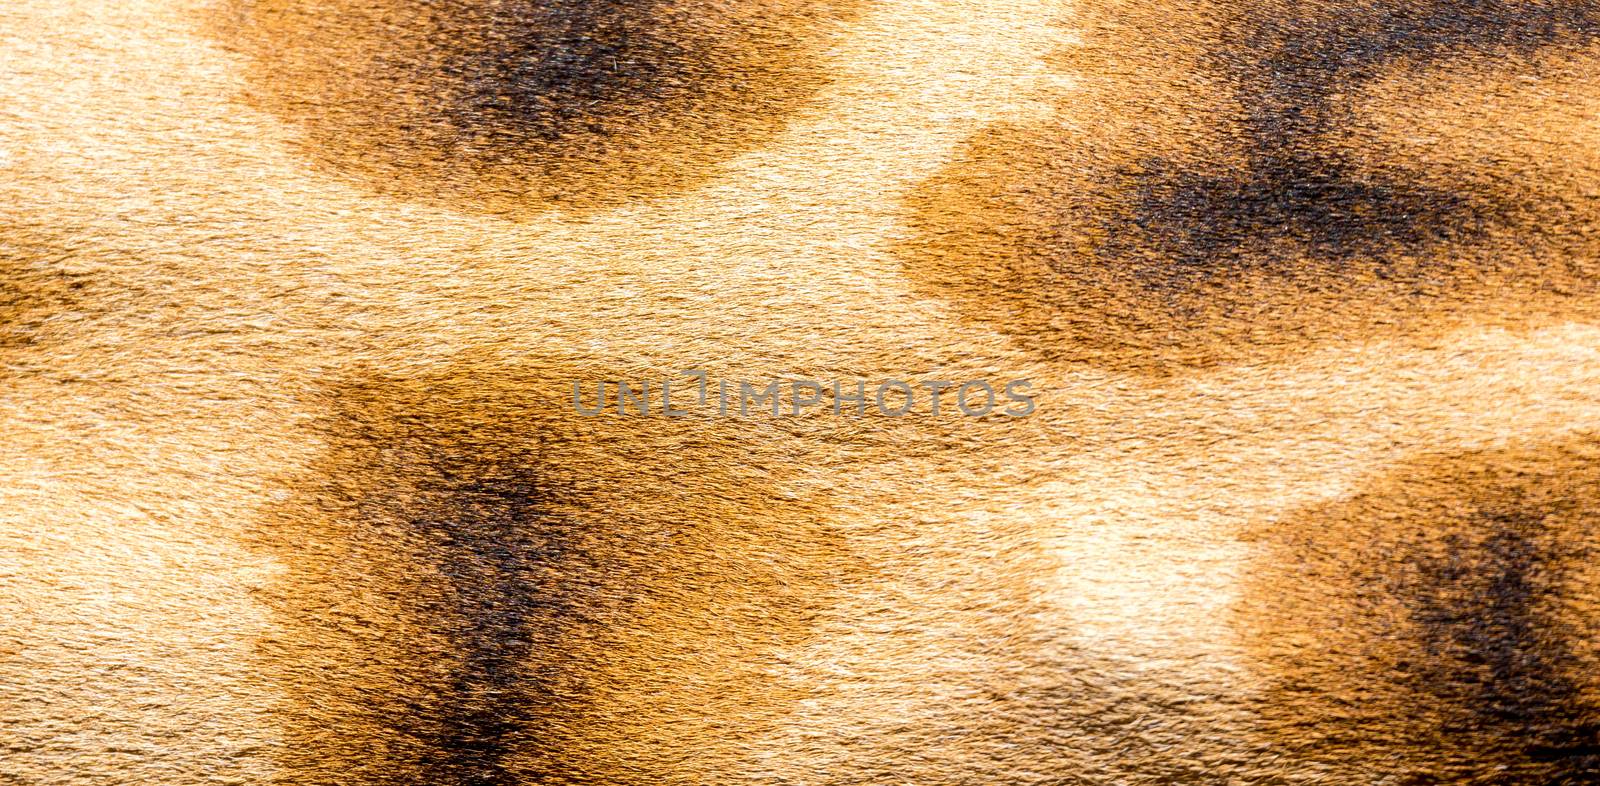 The fur of a giraffe in close-up by 25ehaag6